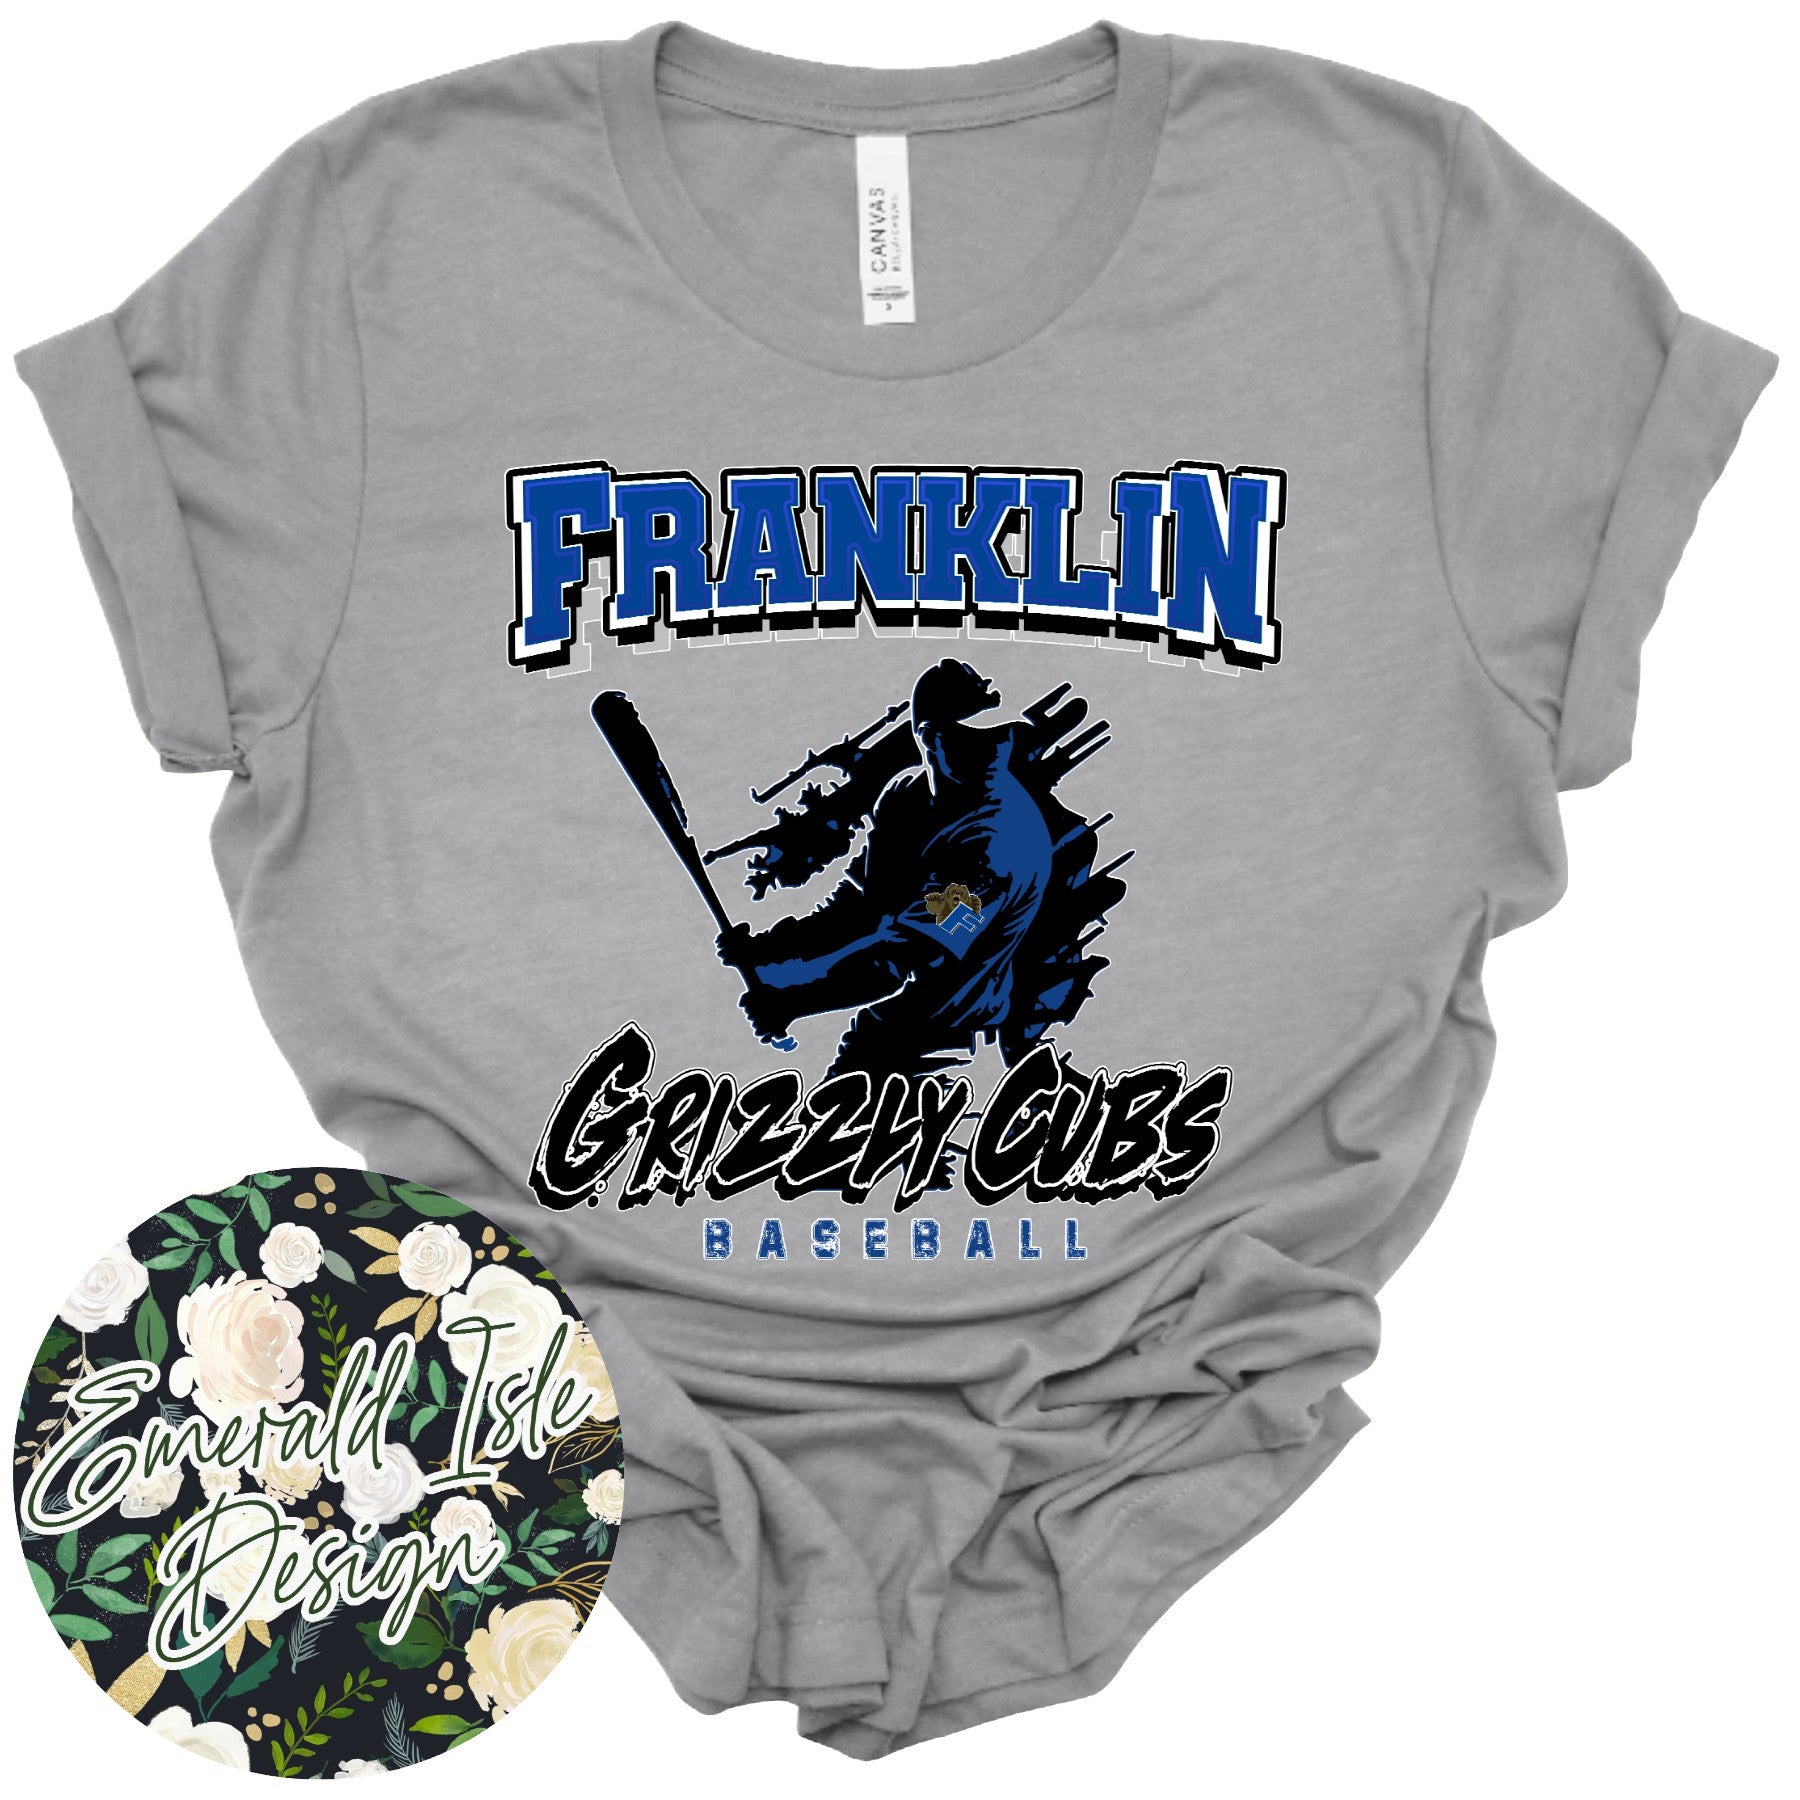 Franklin Grizzly Cubs Baseball Design – Emerald Isle Design